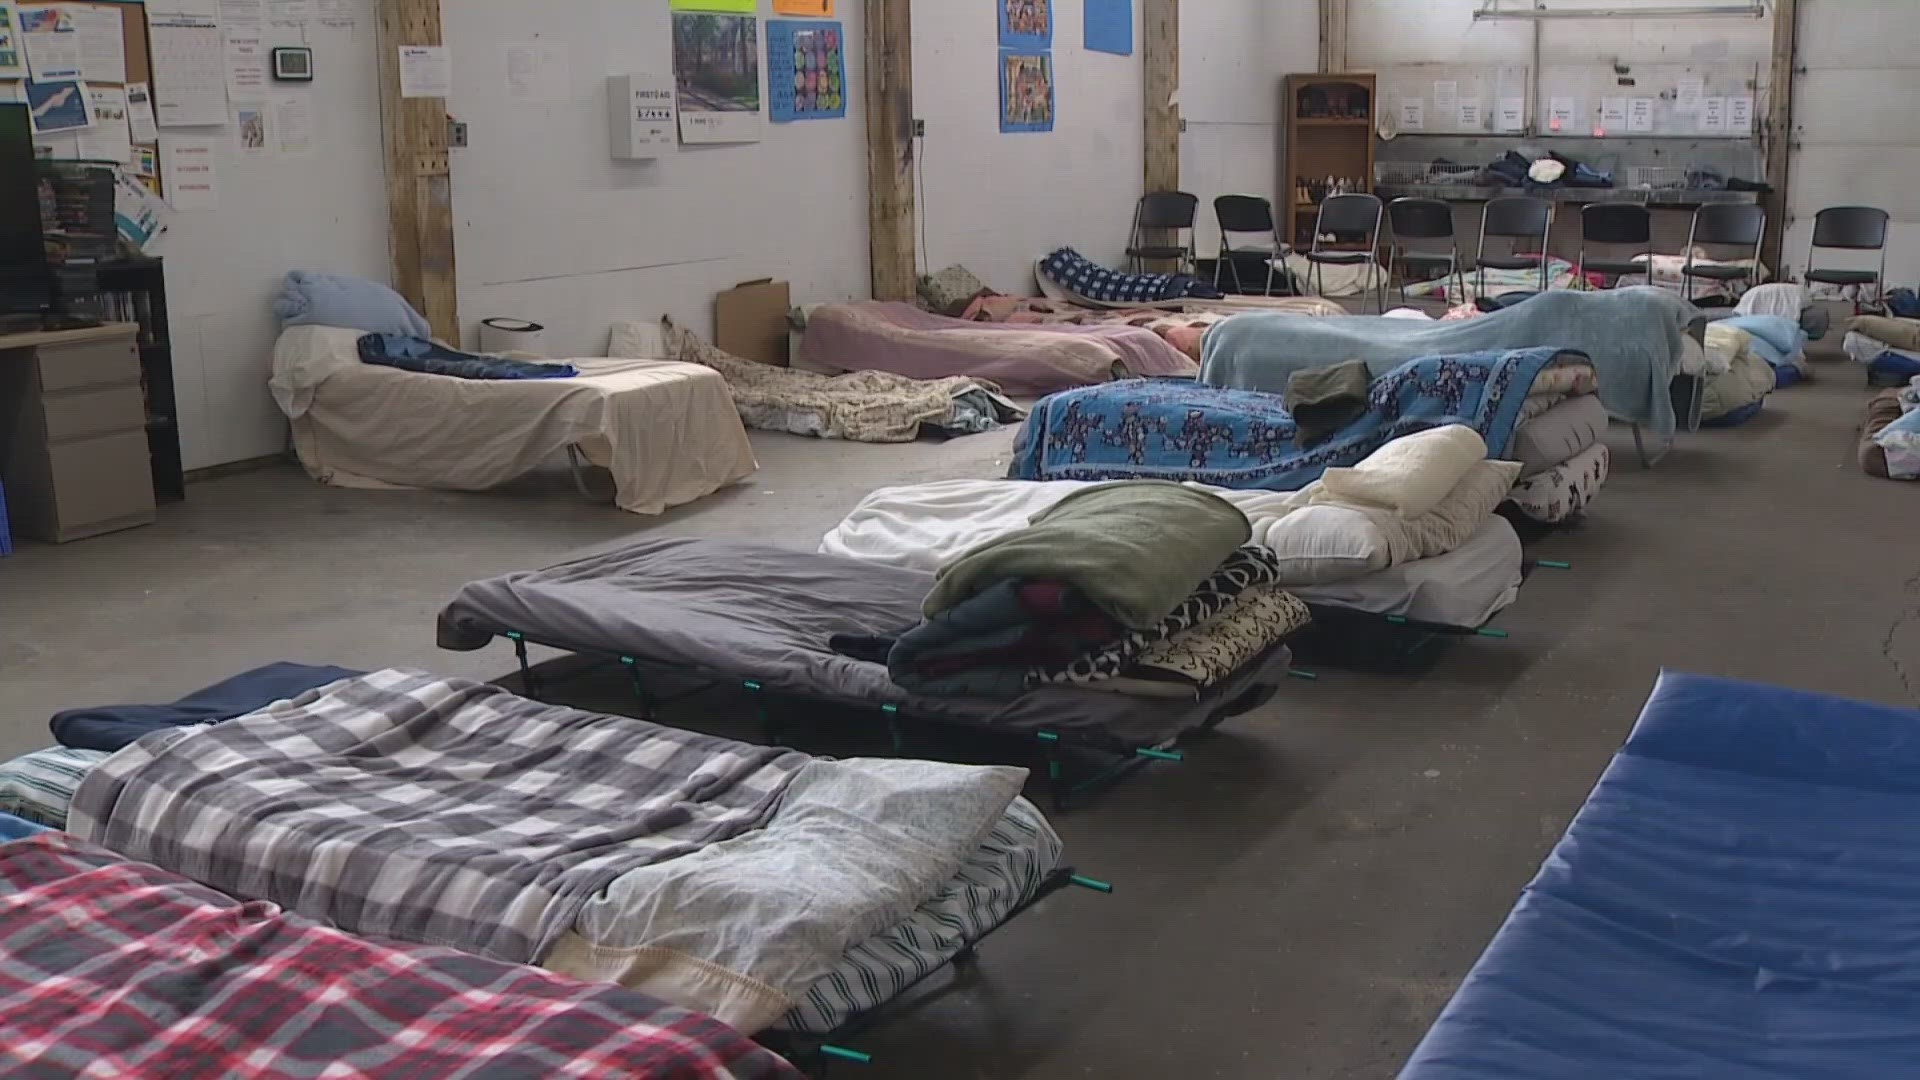 The homeless population is up 70%, but outreach workers say progress is being made.